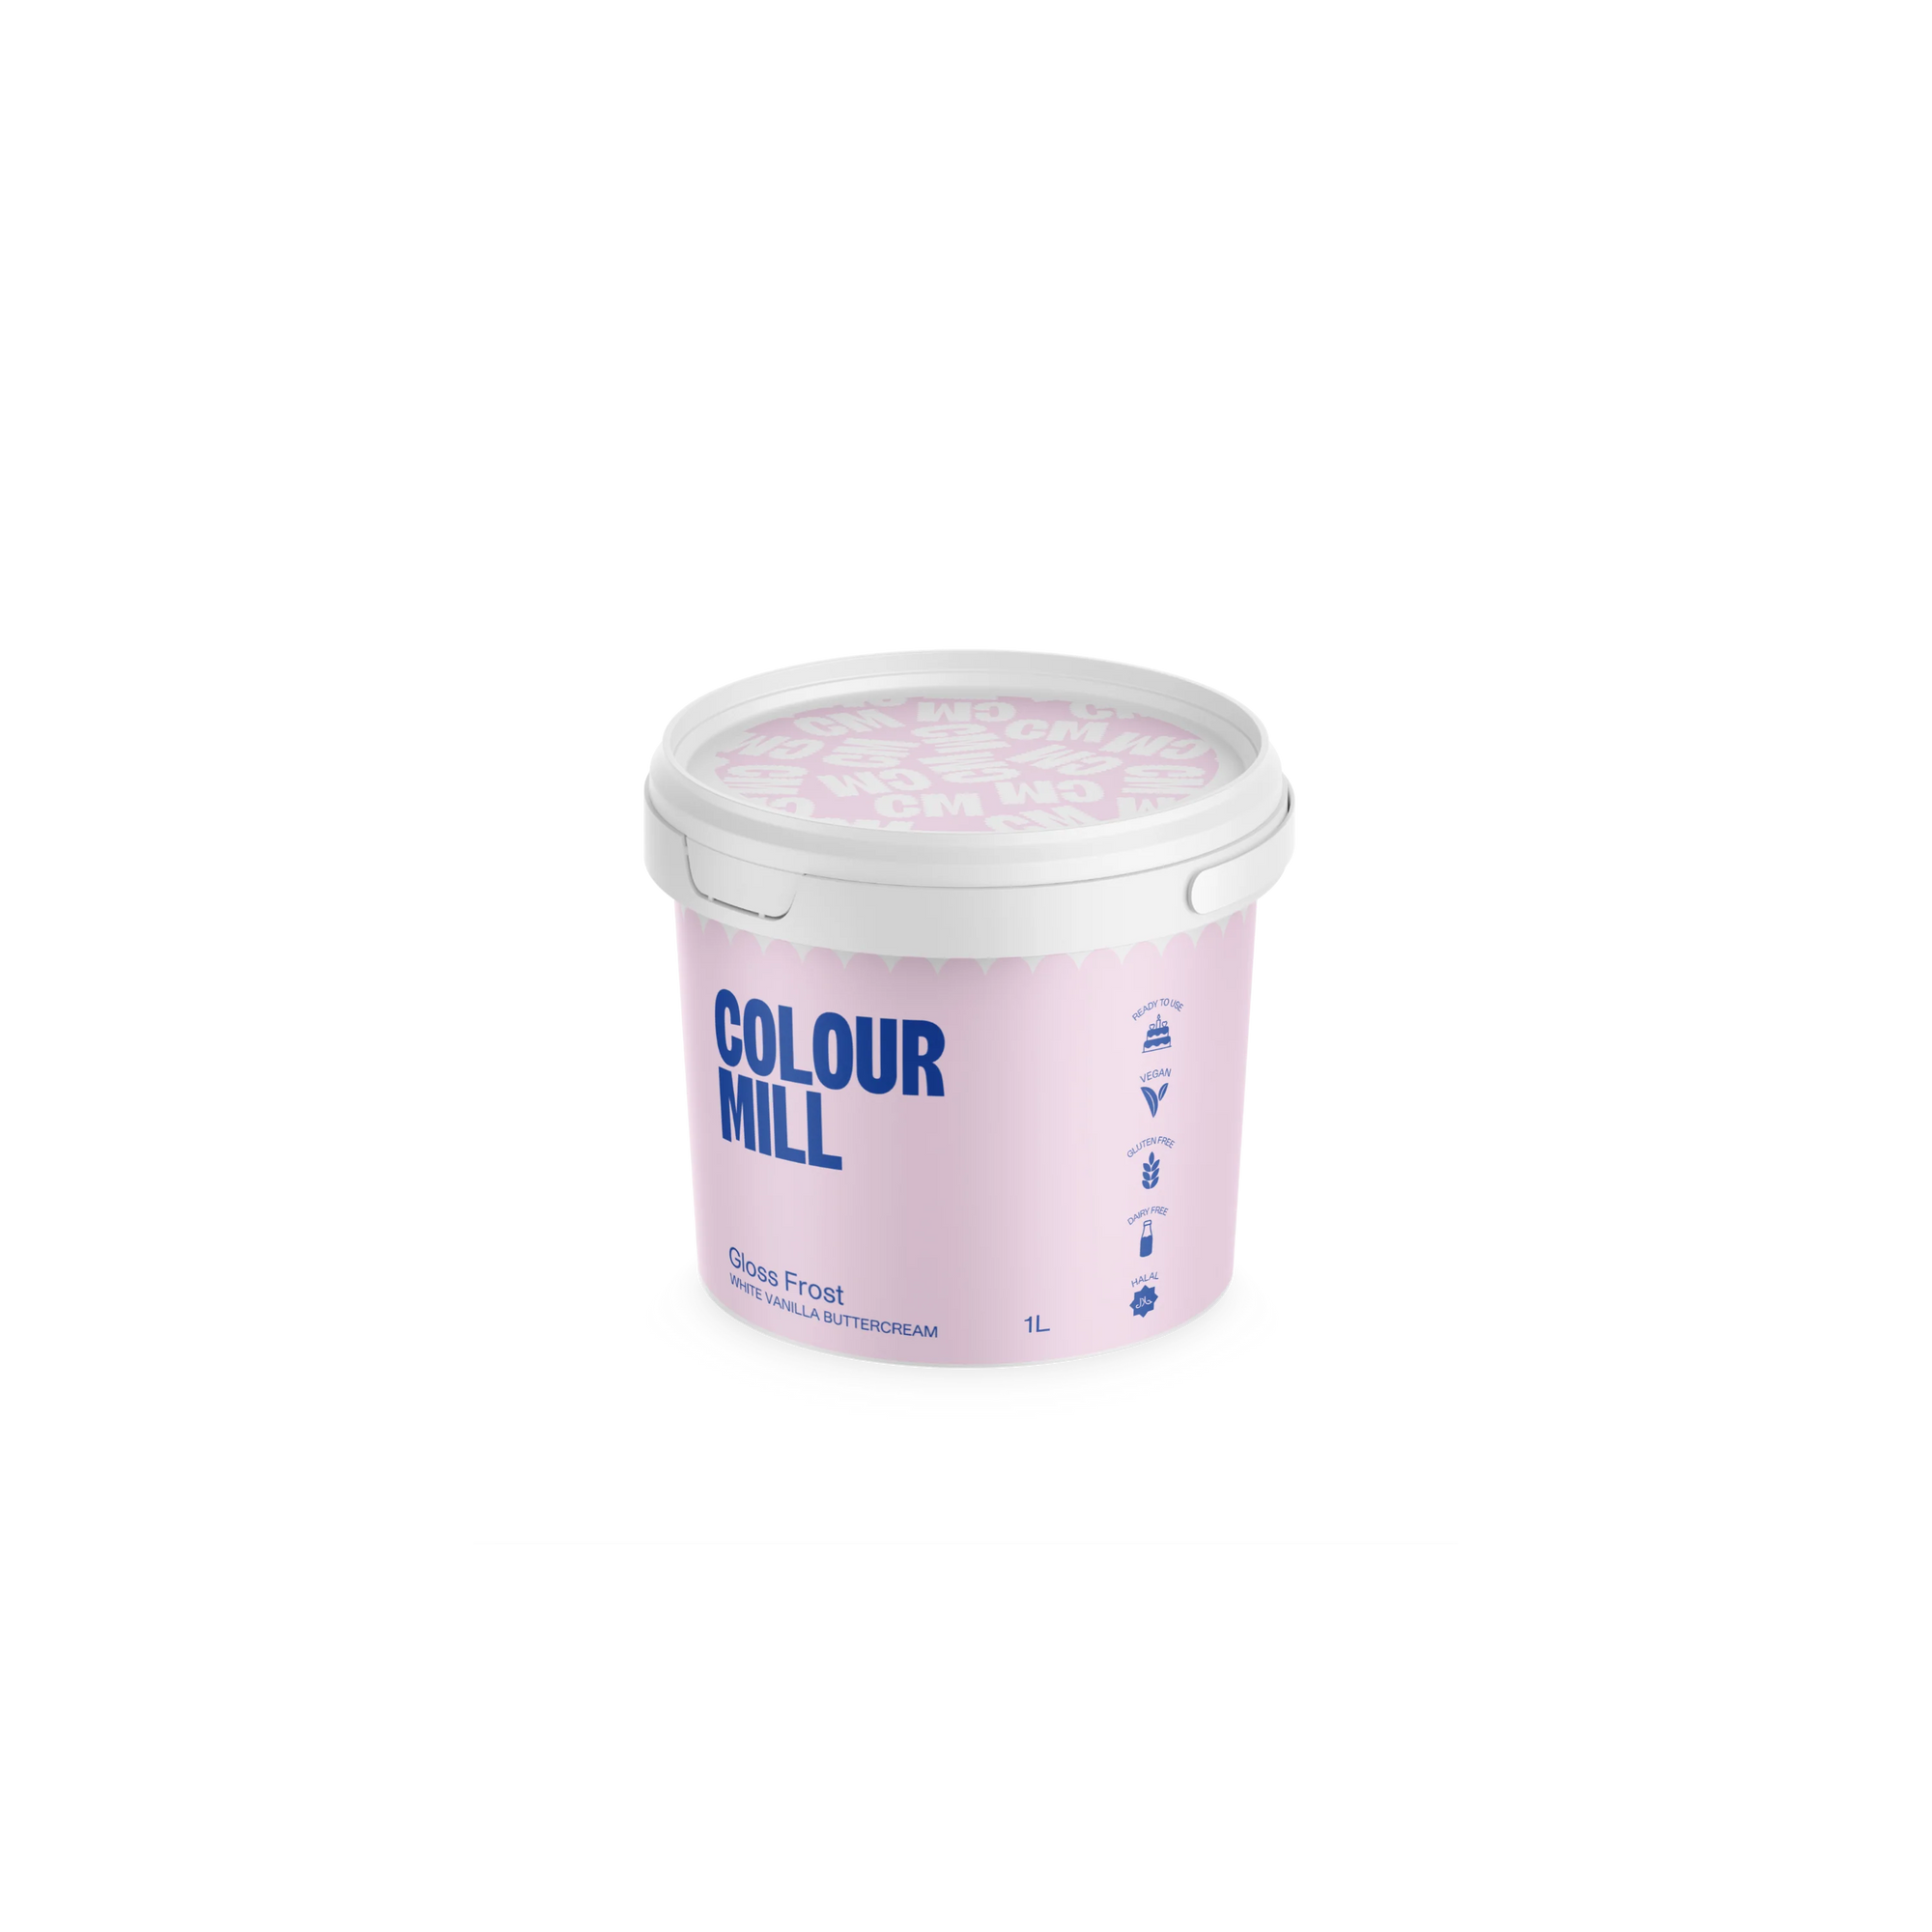 COLOUR MILL GLOSS FROST - 1L